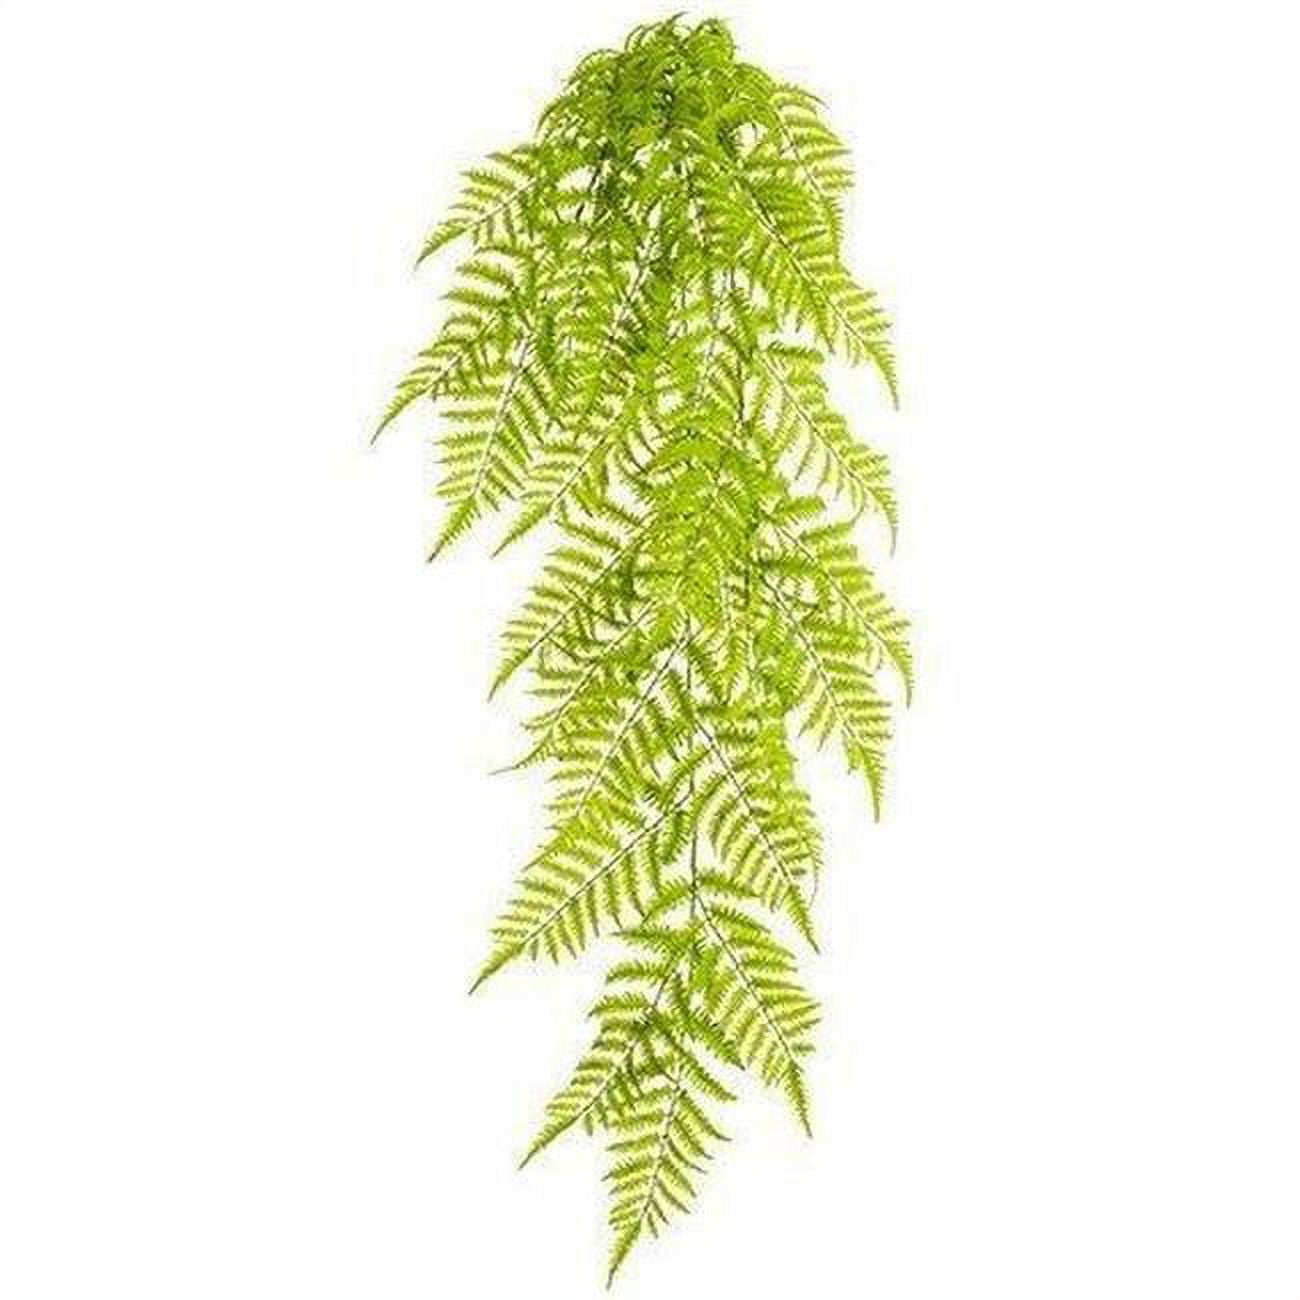 Picture of AllState Floral PBF330-GR 50 in. UV Protected Soft Pe Boston Fern Hanging Bush - Green - Pack of 6